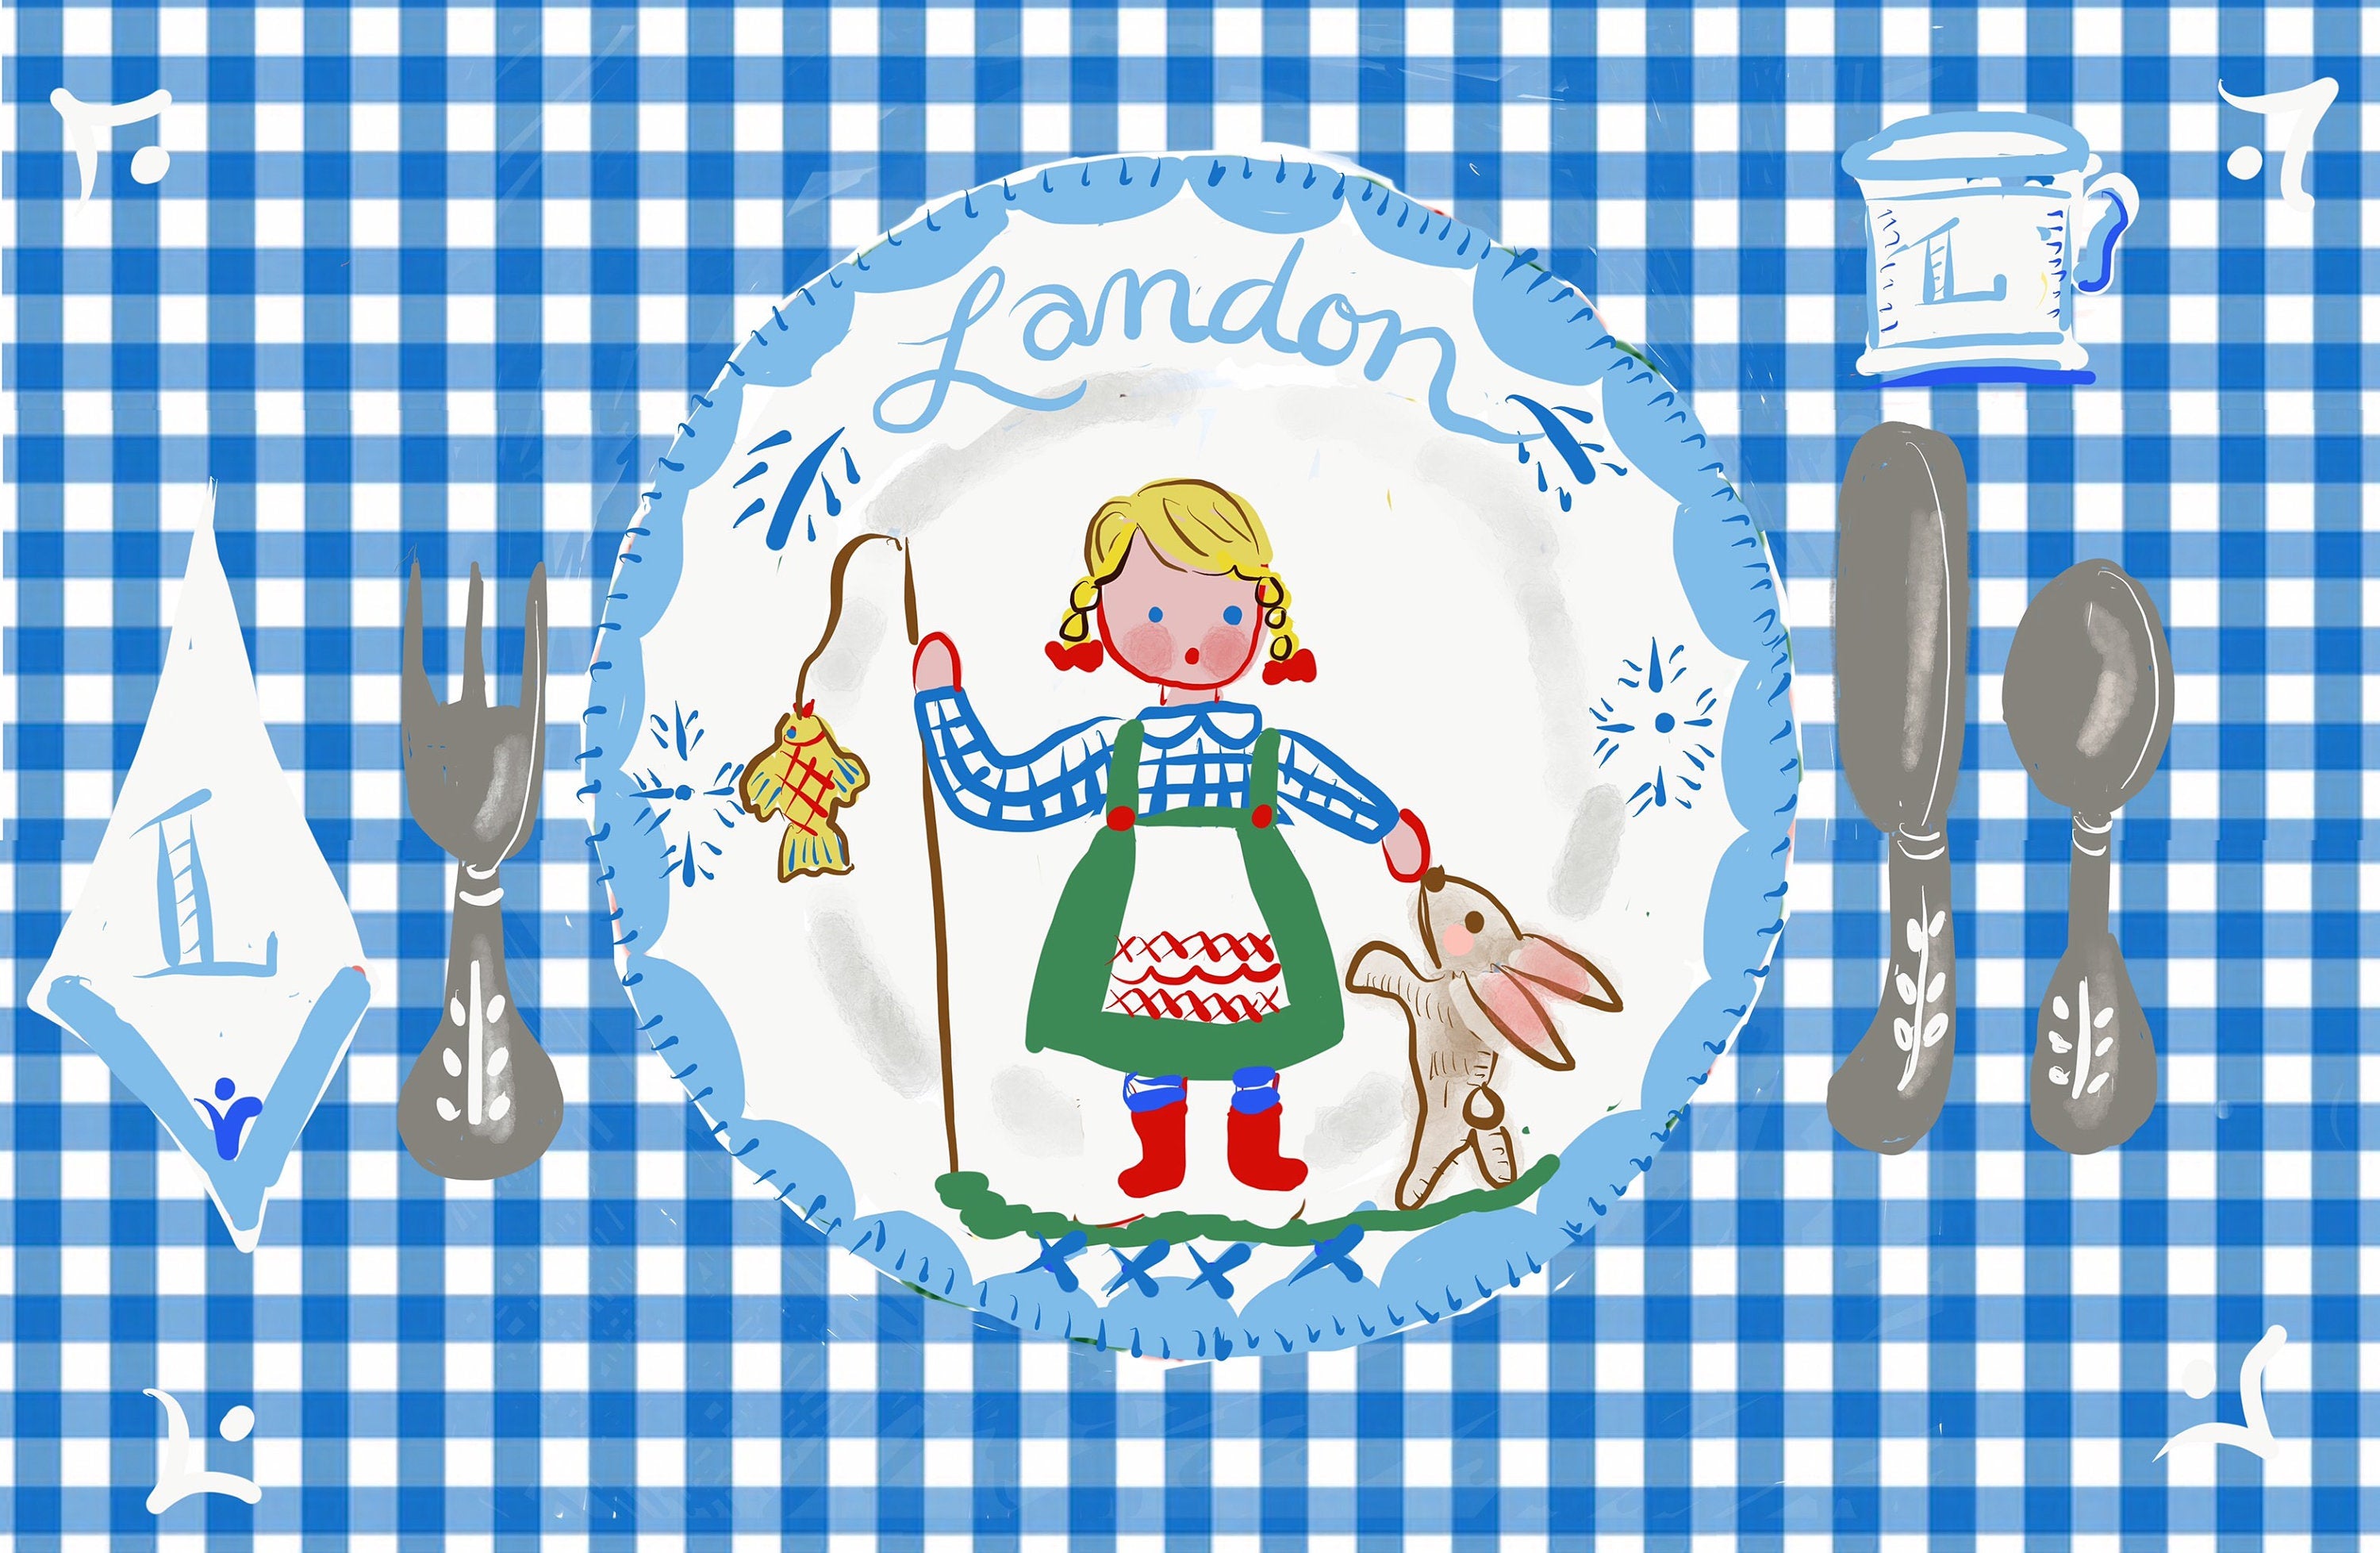 Laminated Placemat - Blue Fisherman Girl and Bunny - Tricia Lowenfield Design